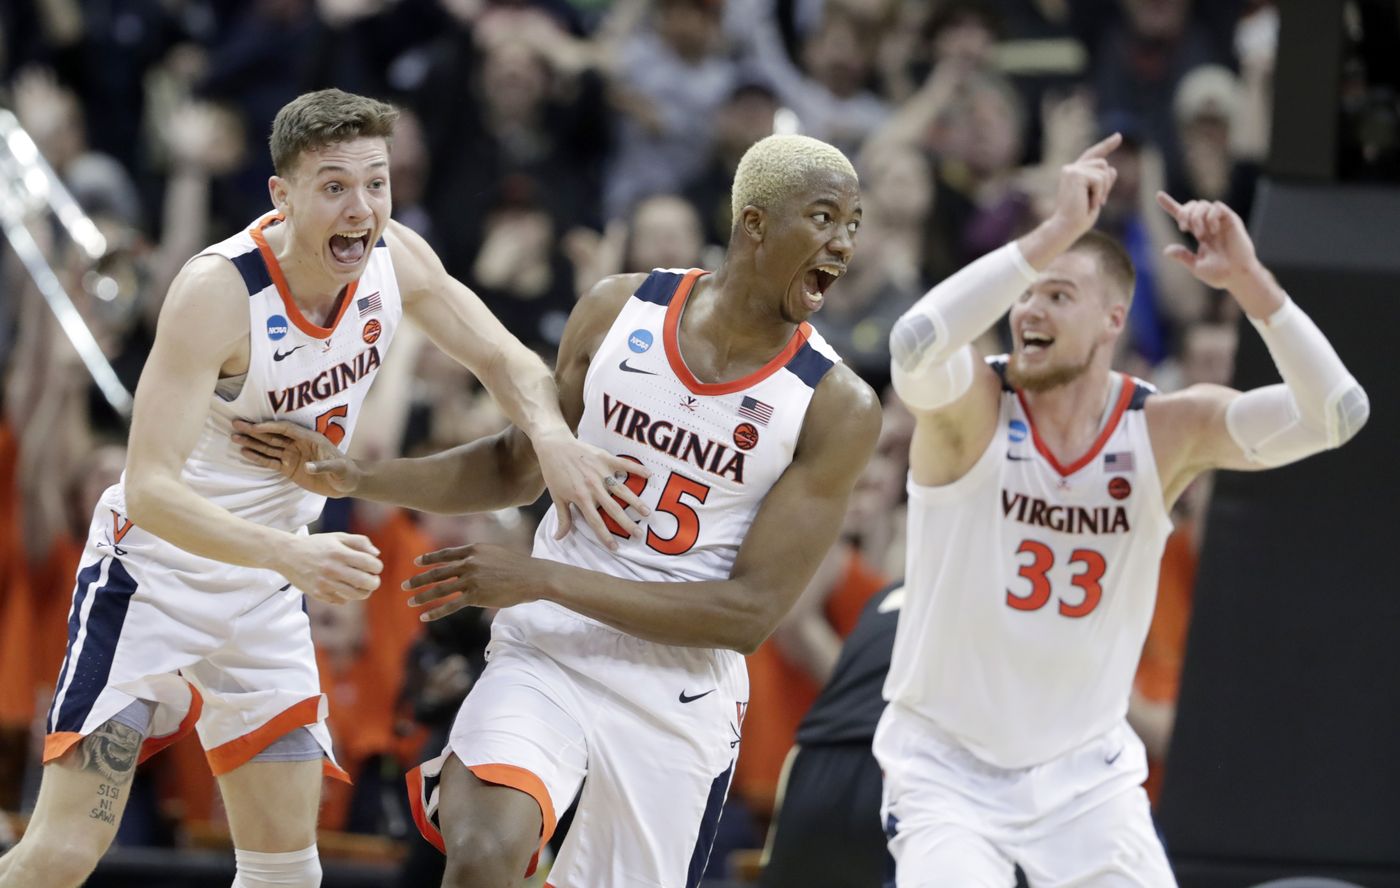 Armour: After Last Year’s Crushing Defeat, Virginia Feels Like Team of Destiny